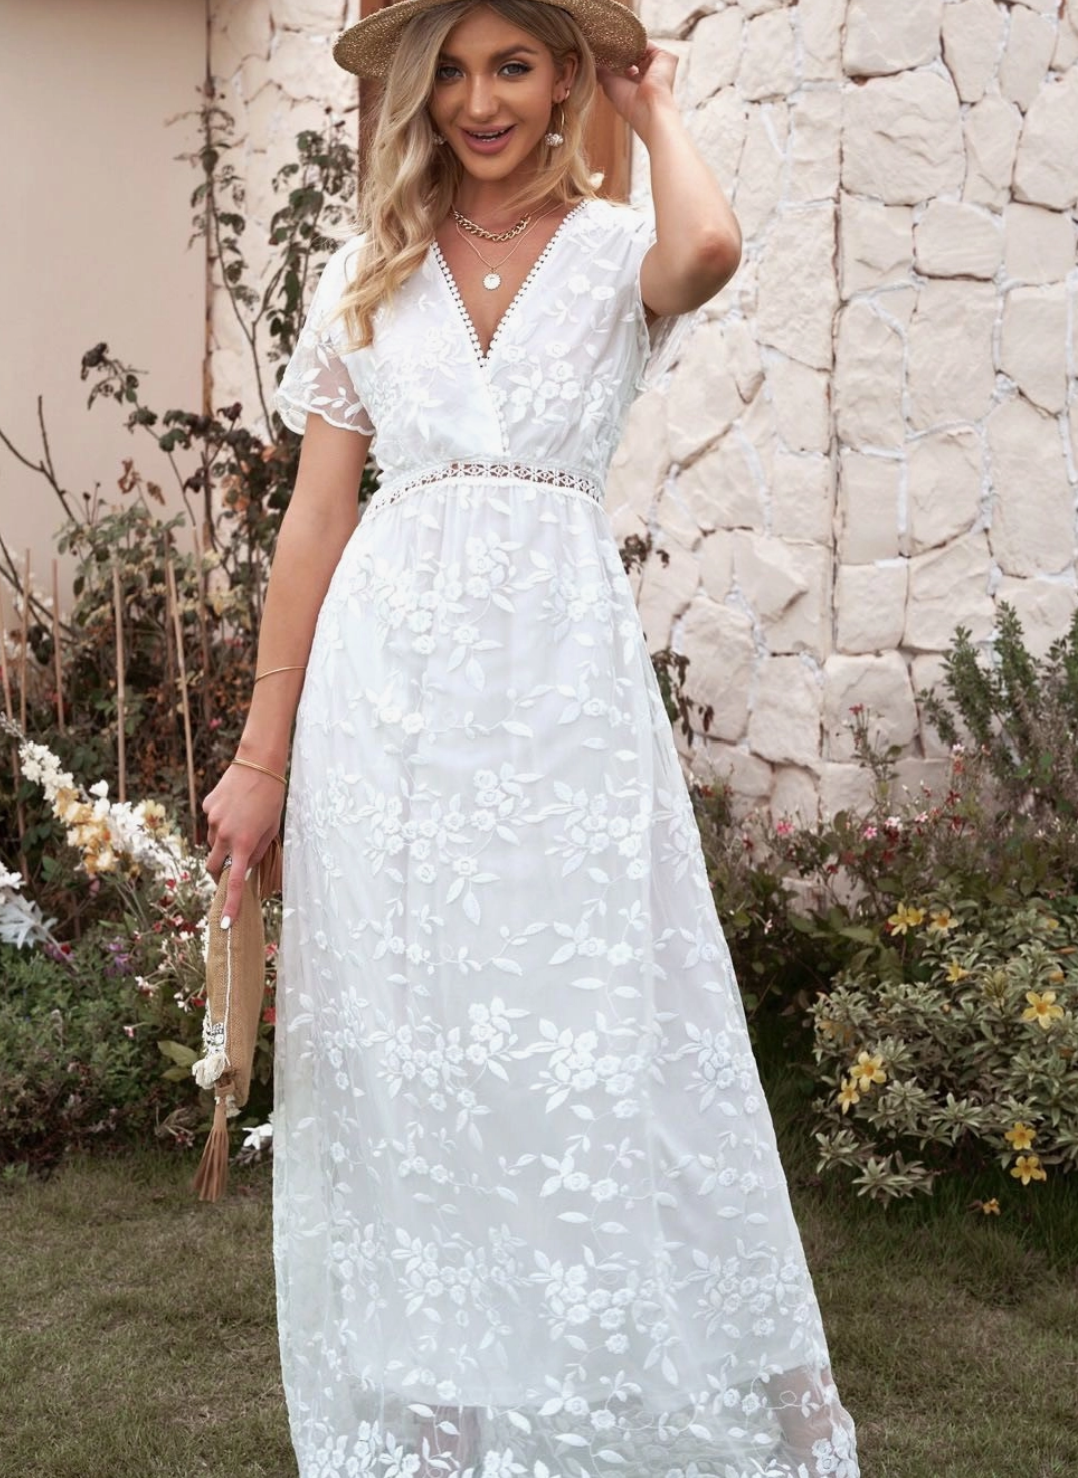 White Lace Maxi Dress - The Midwest Closet Collection